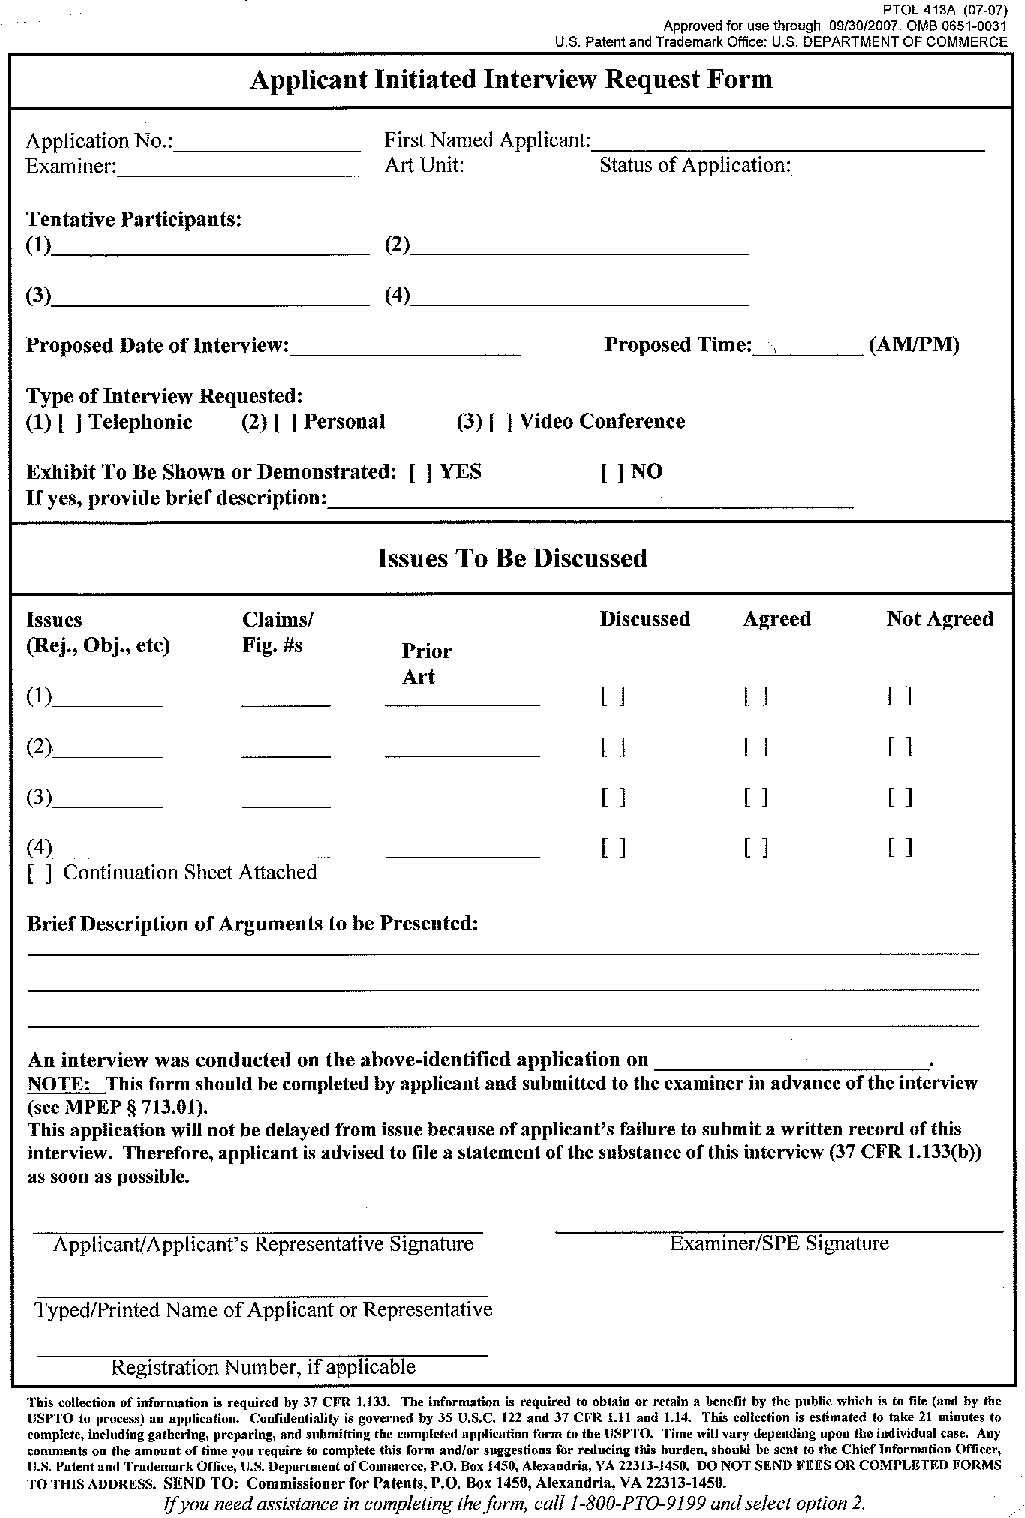 form ptol 413a applicant initiated interview request form